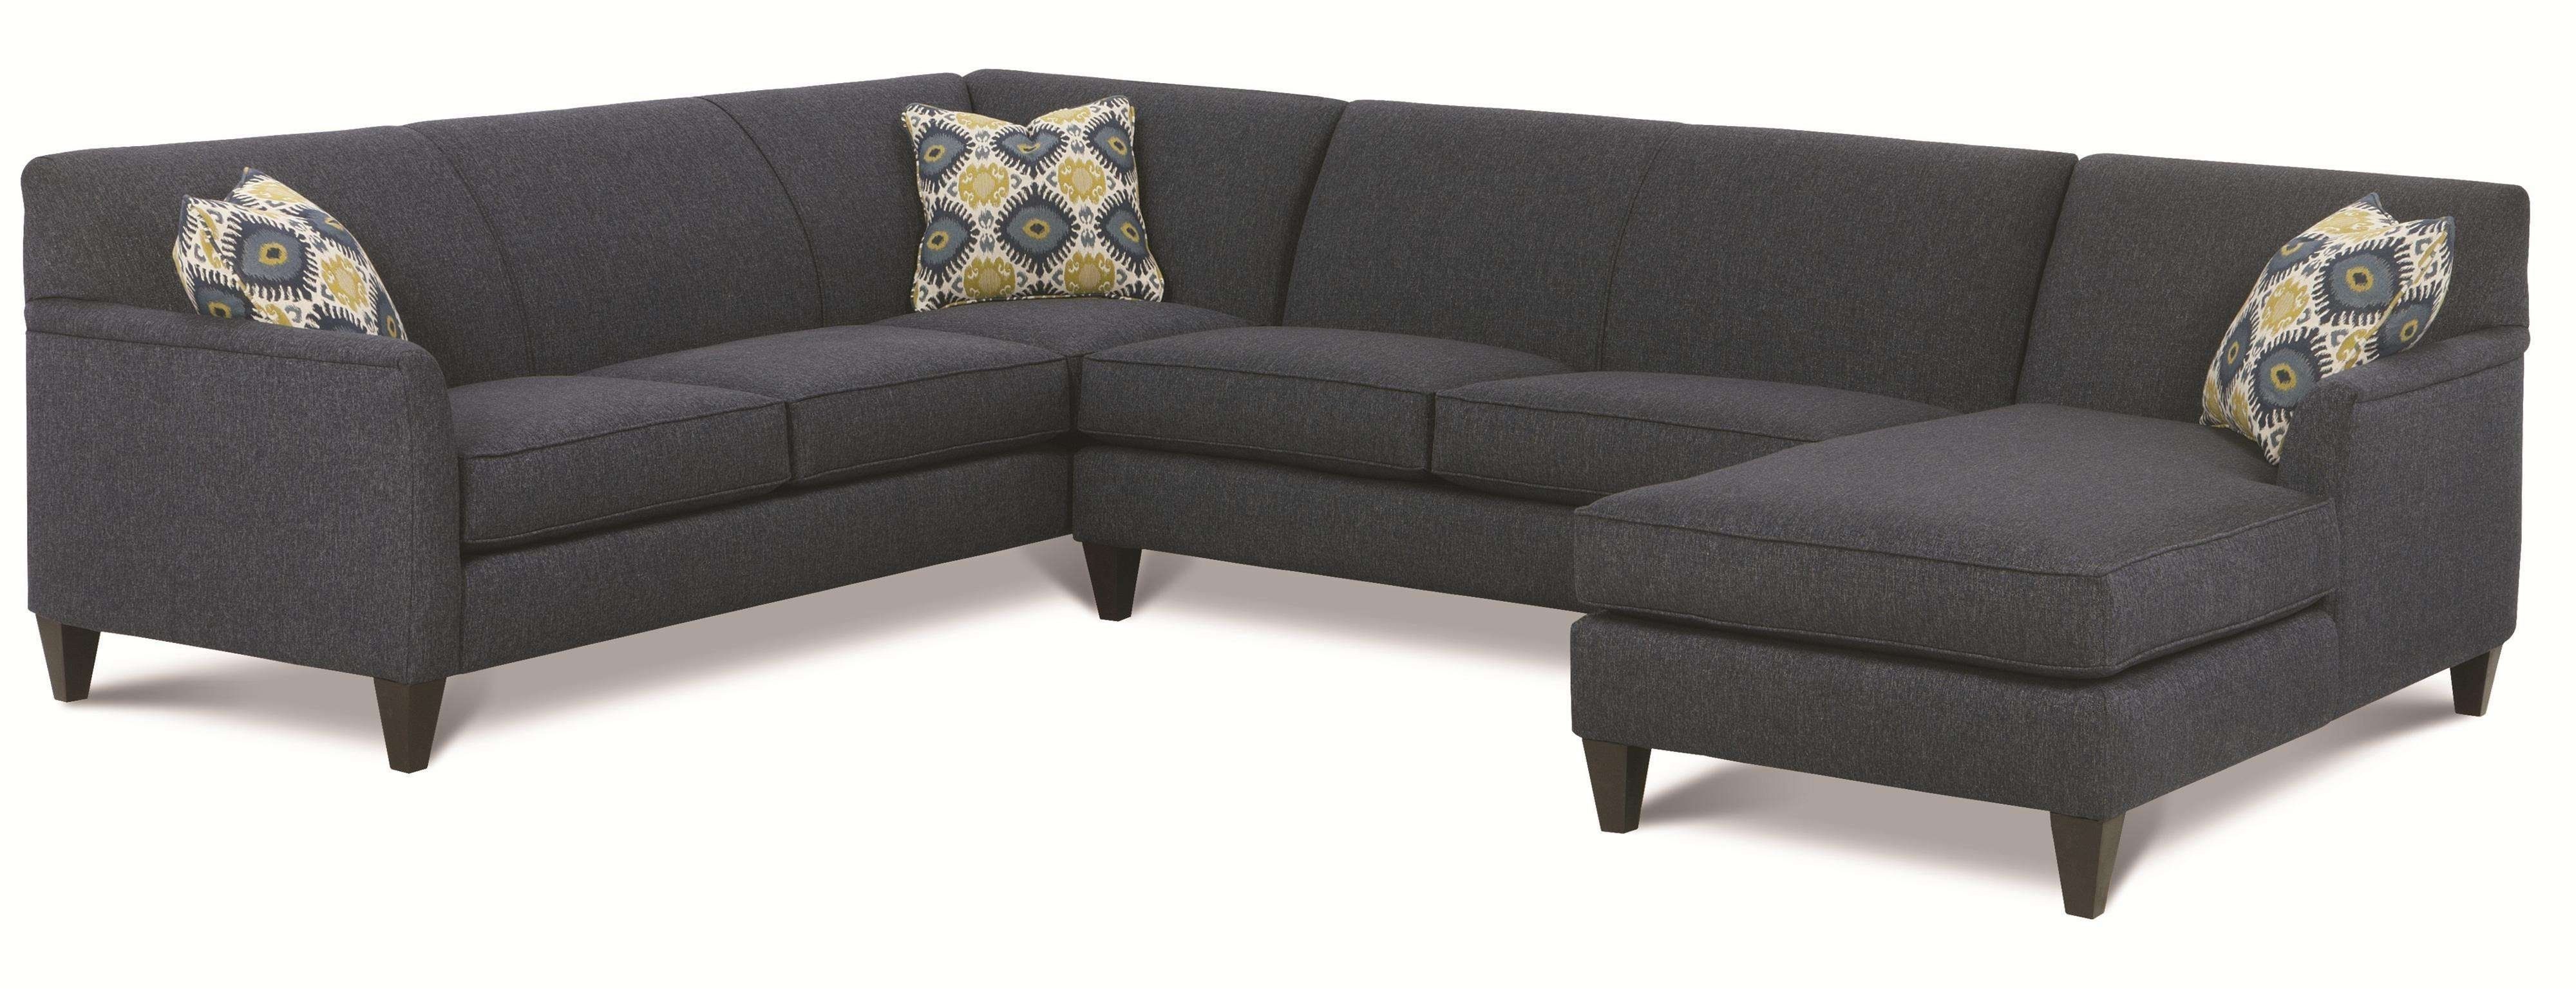 Simple 25 2 Piece Sectionals With Chaise Awesome | Russiandesignshow With Regard To Aquarius Dark Grey 2 Piece Sectionals With Laf Chaise (View 6 of 30)